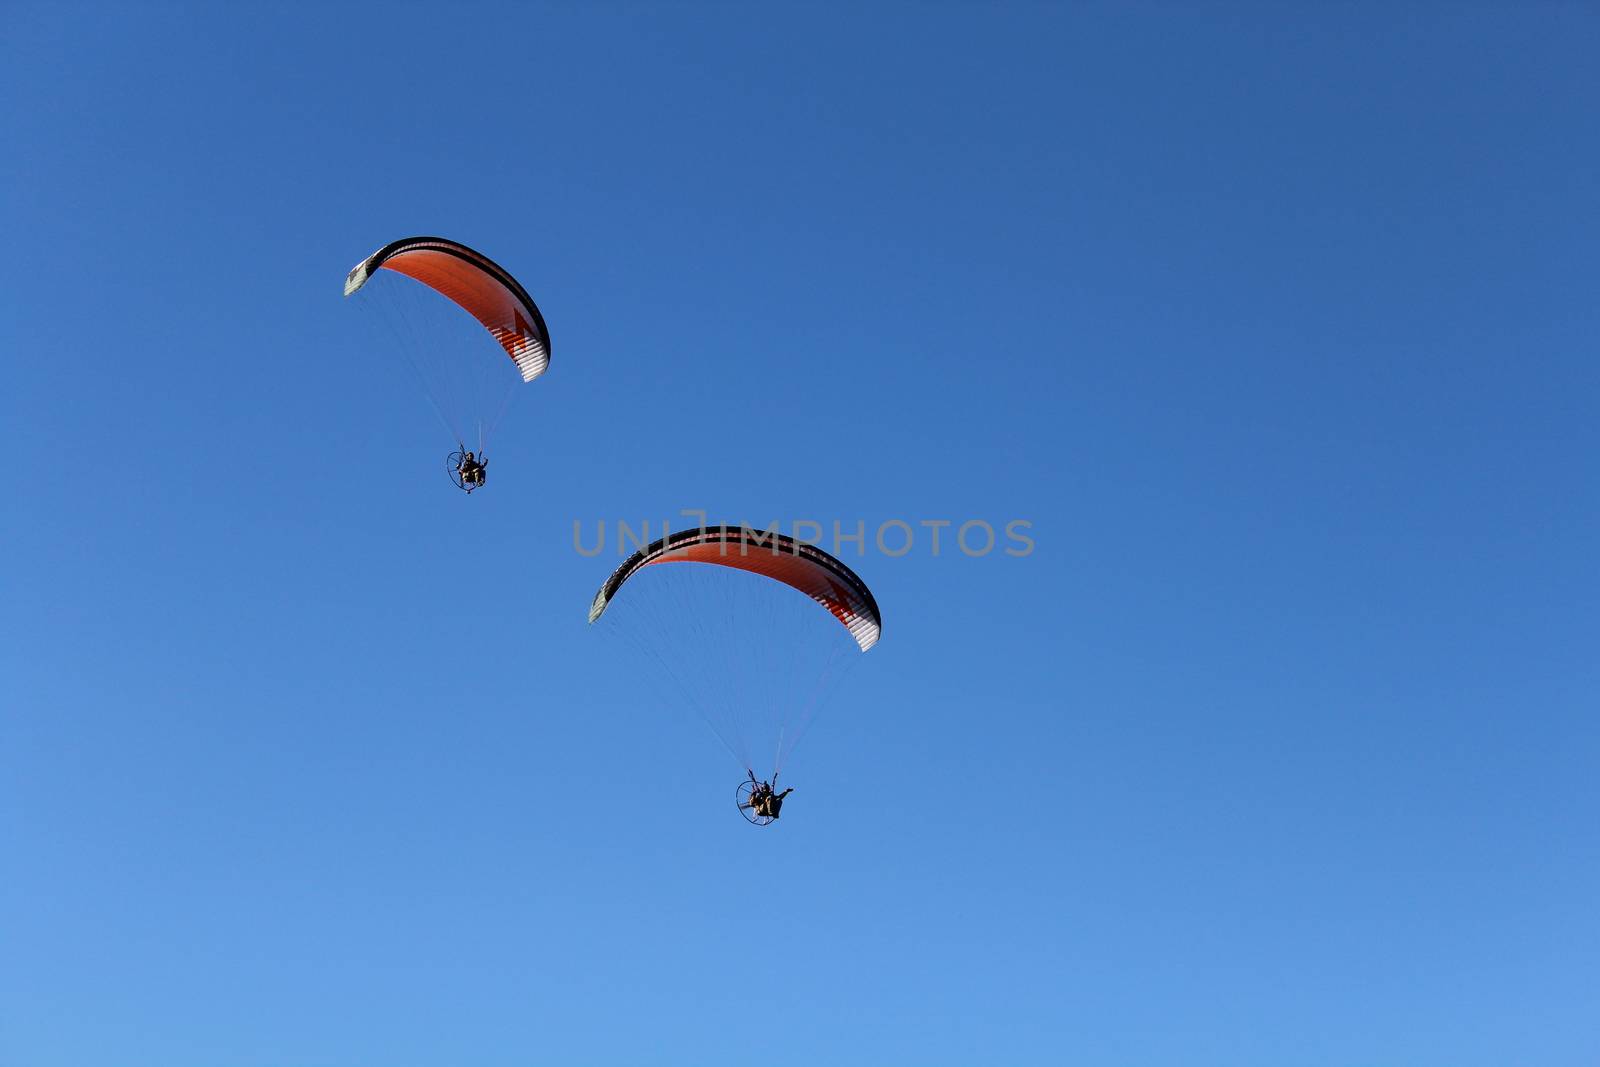 Some pilots, paragliders, make the spectacular perform